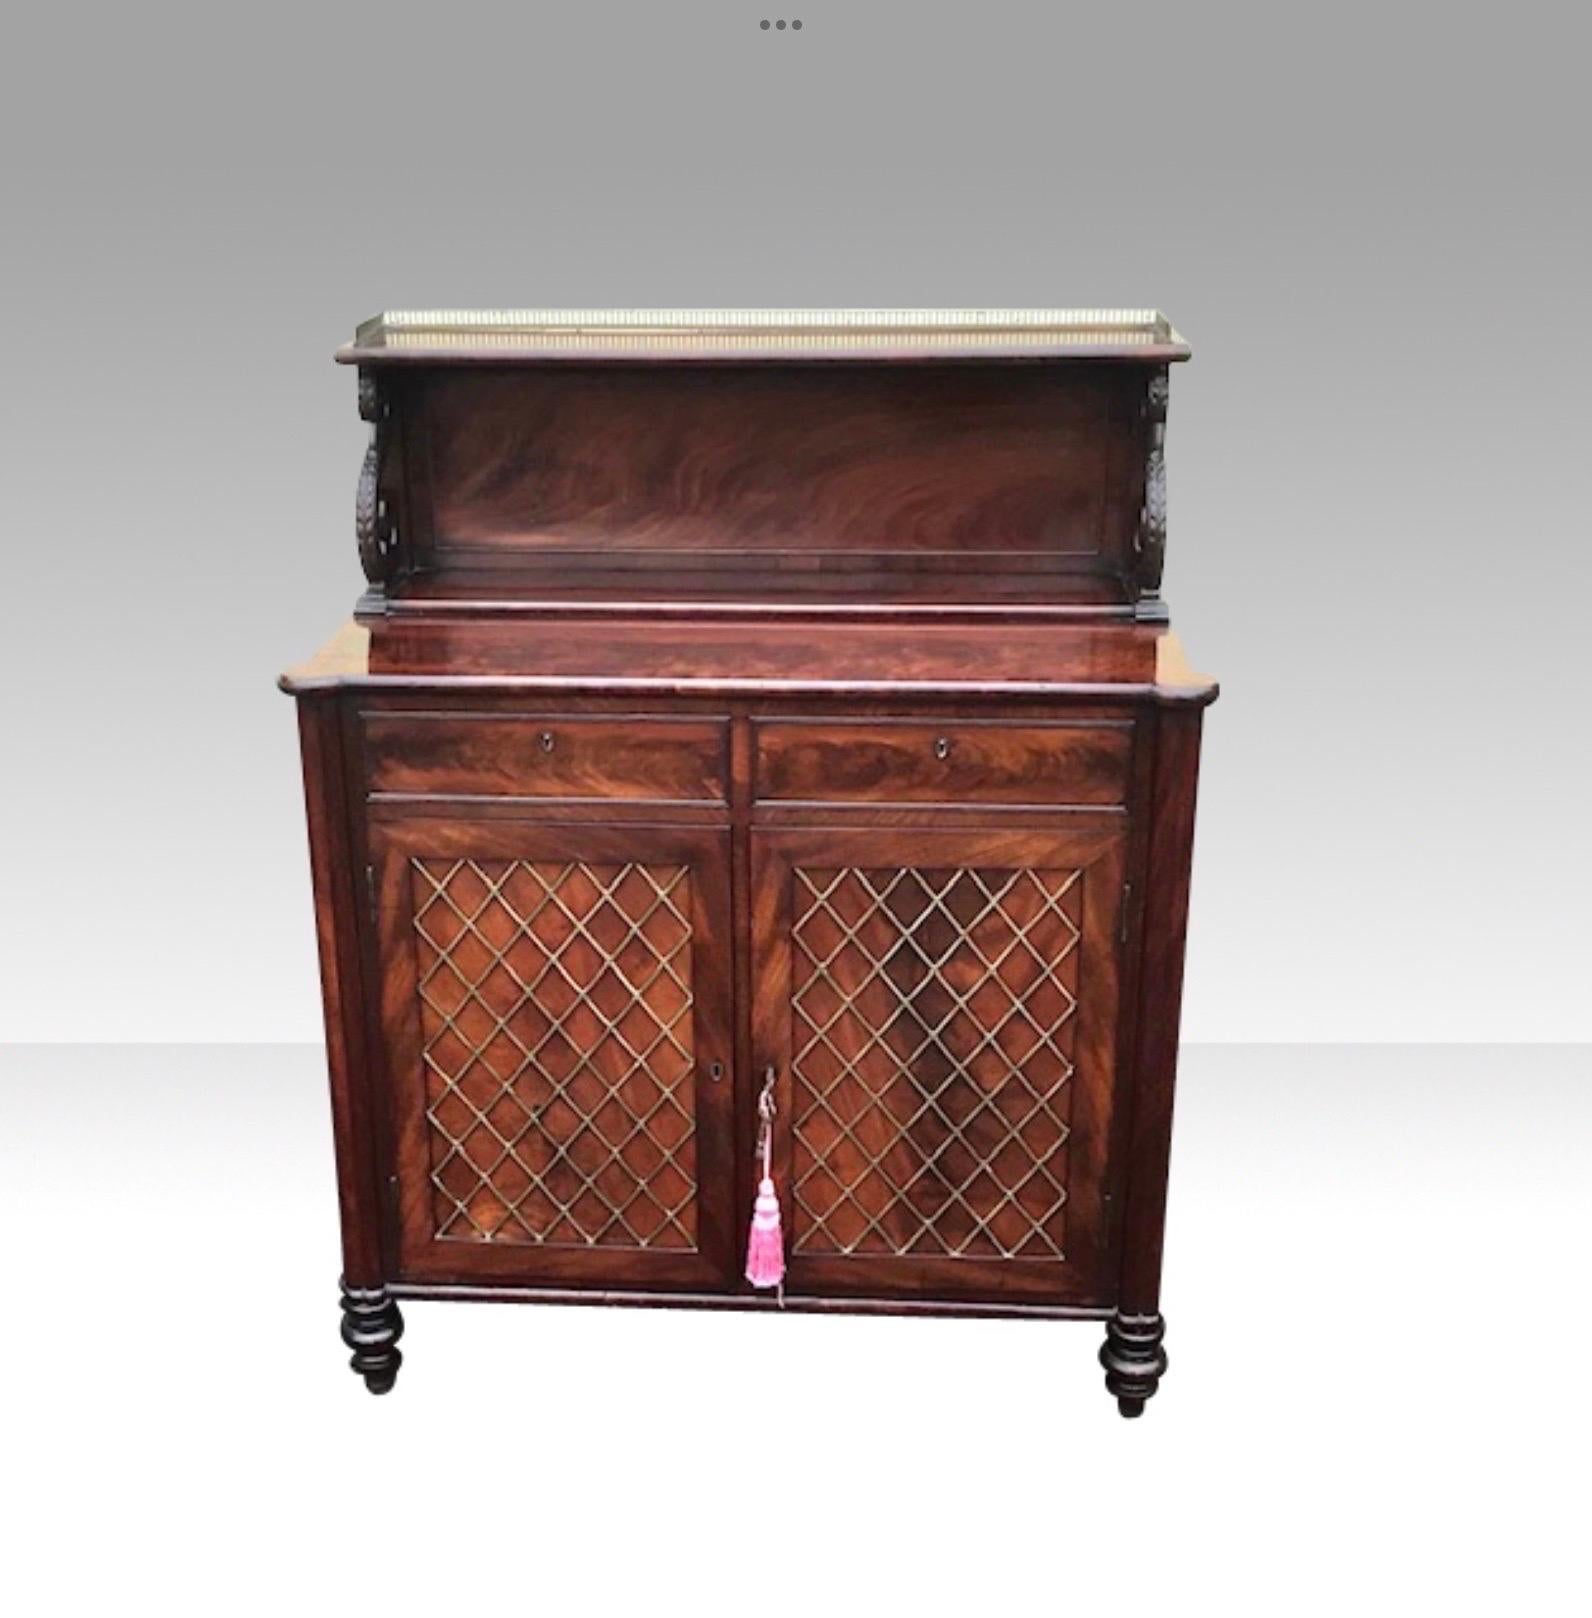 Superb Quality Regency Mahogany antique Chiffioneer cabinet sideboard of small porportions
Original brass gallery and original brass grills 
C1820
 Measures: 38ins W x 47ins H x 17ins deep.

